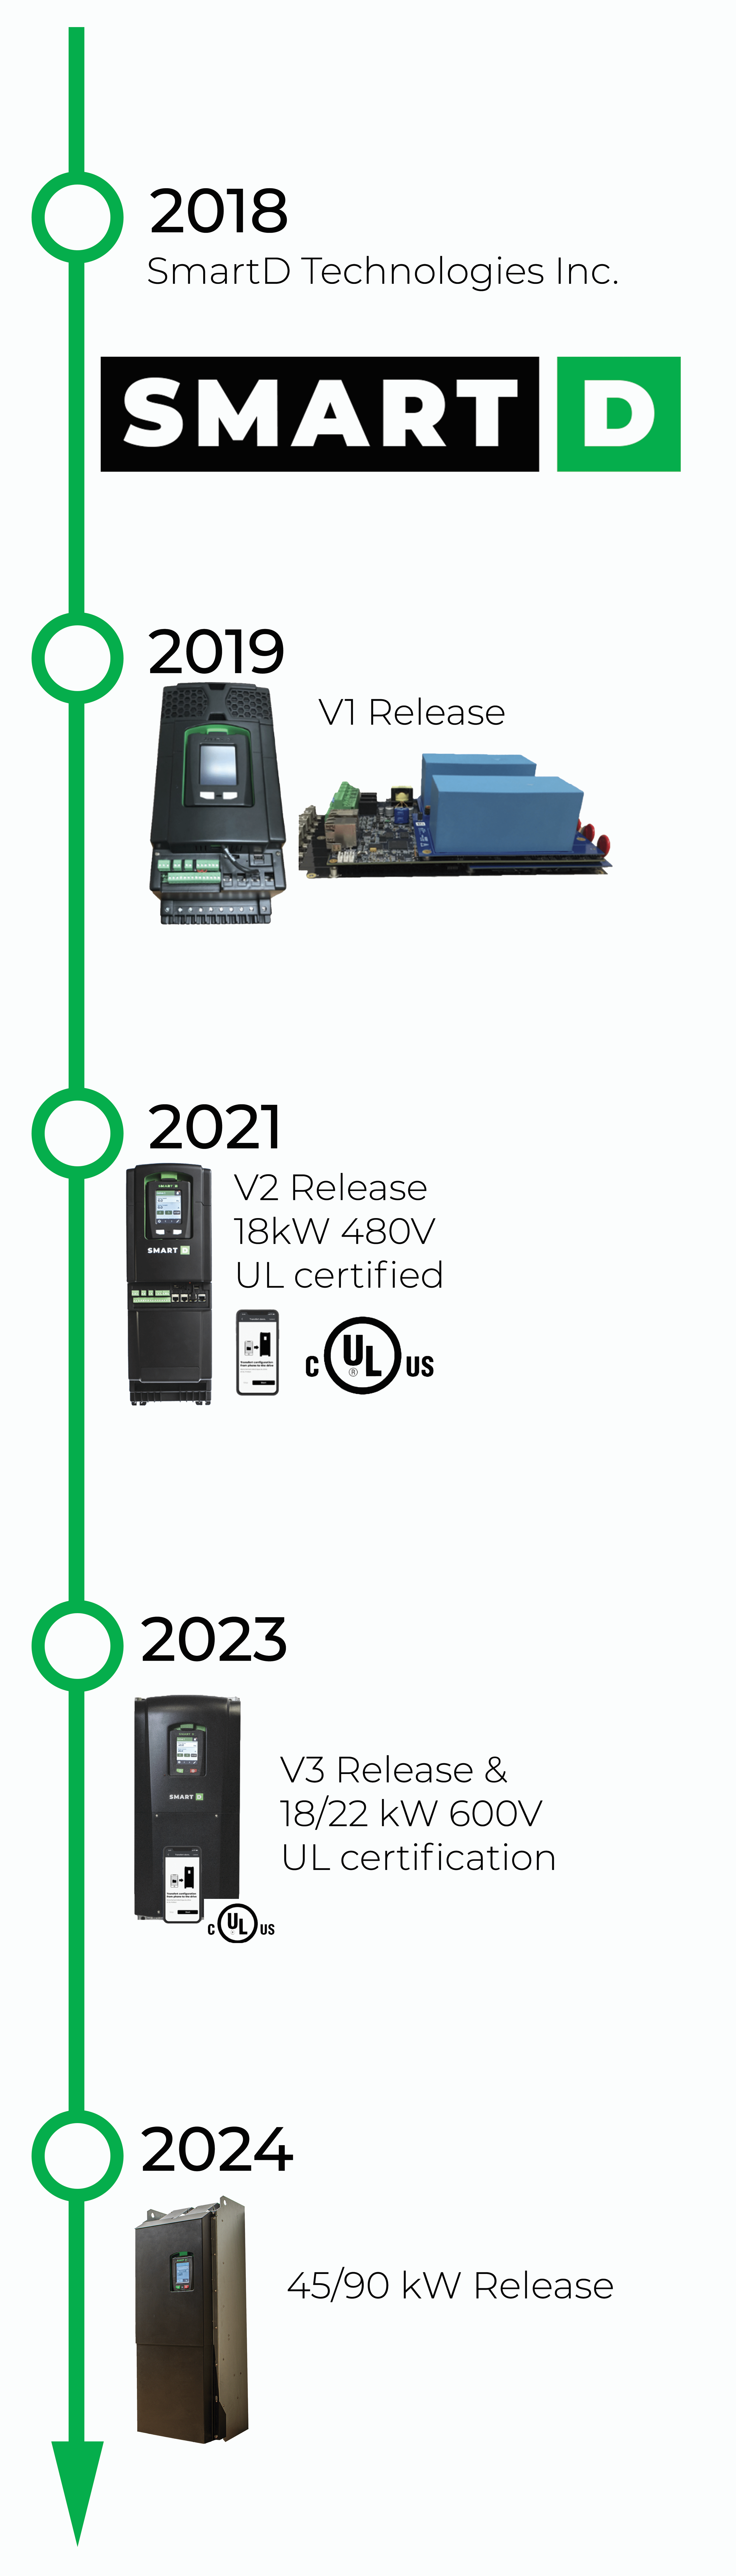 Timeline of SmartD Technologies from 2018 to 2024, showcasing key product releases and milestones.